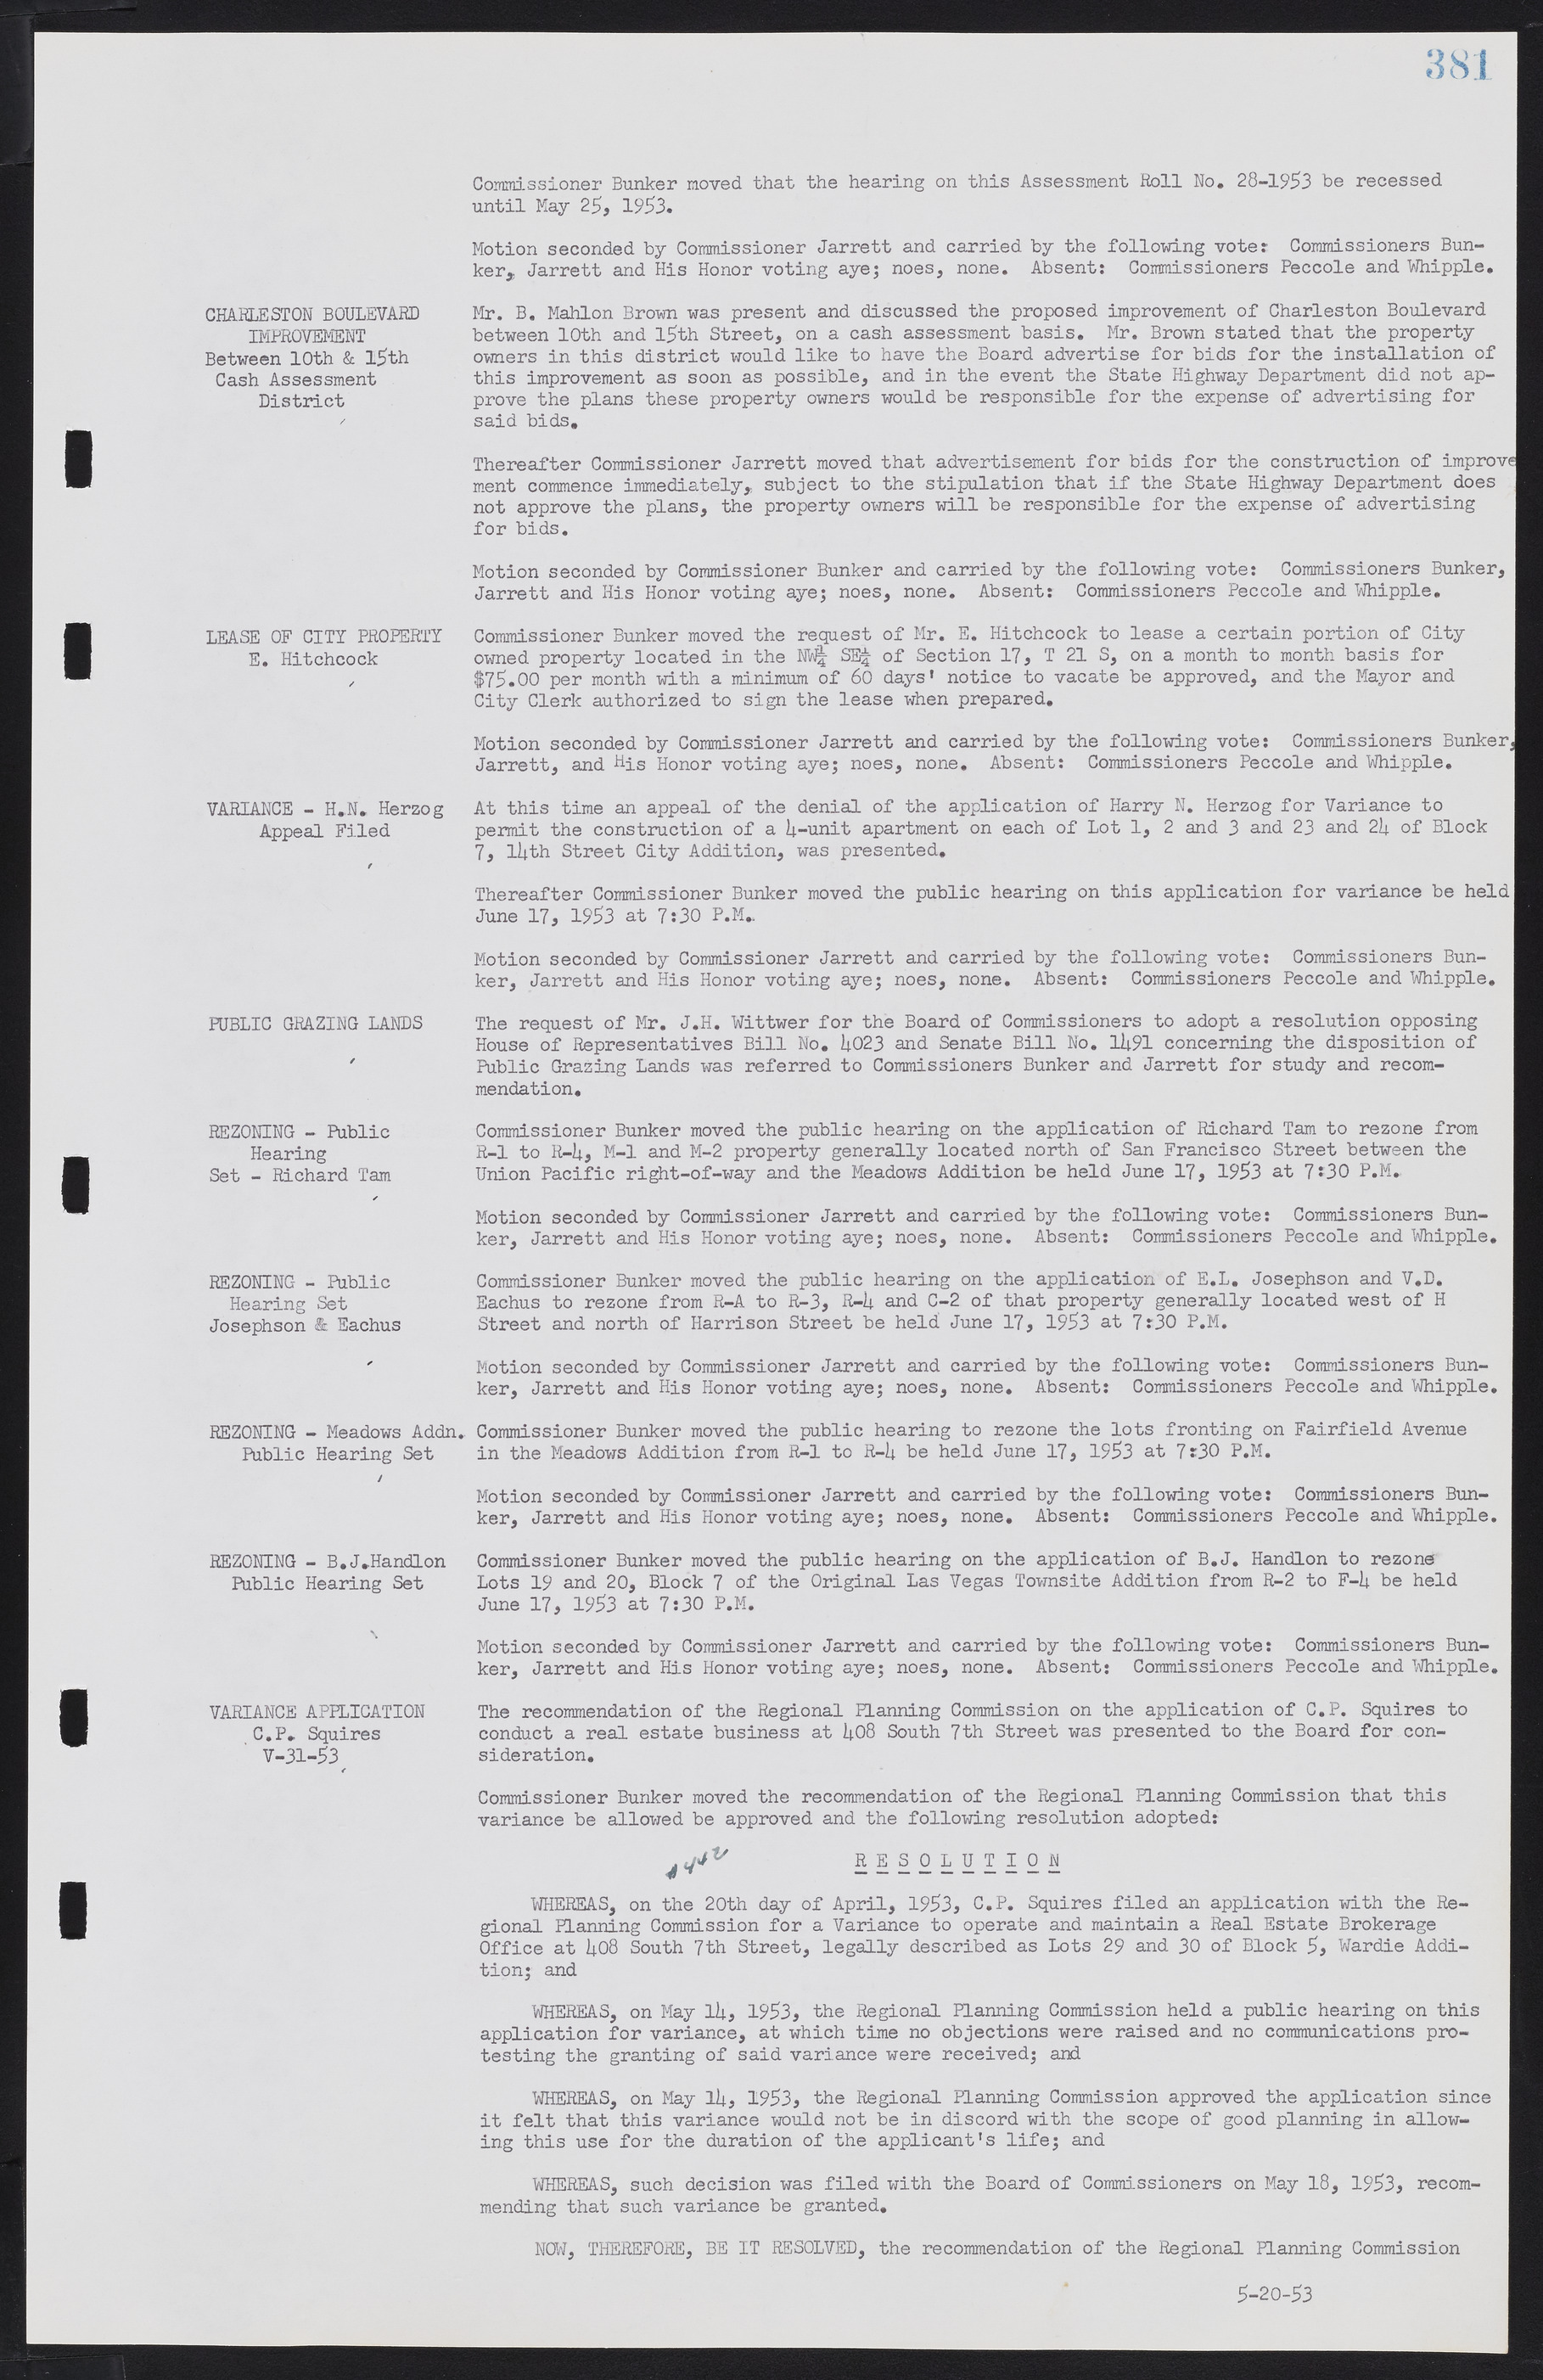 Las Vegas City Commission Minutes, May 26, 1952 to February 17, 1954, lvc000008-409